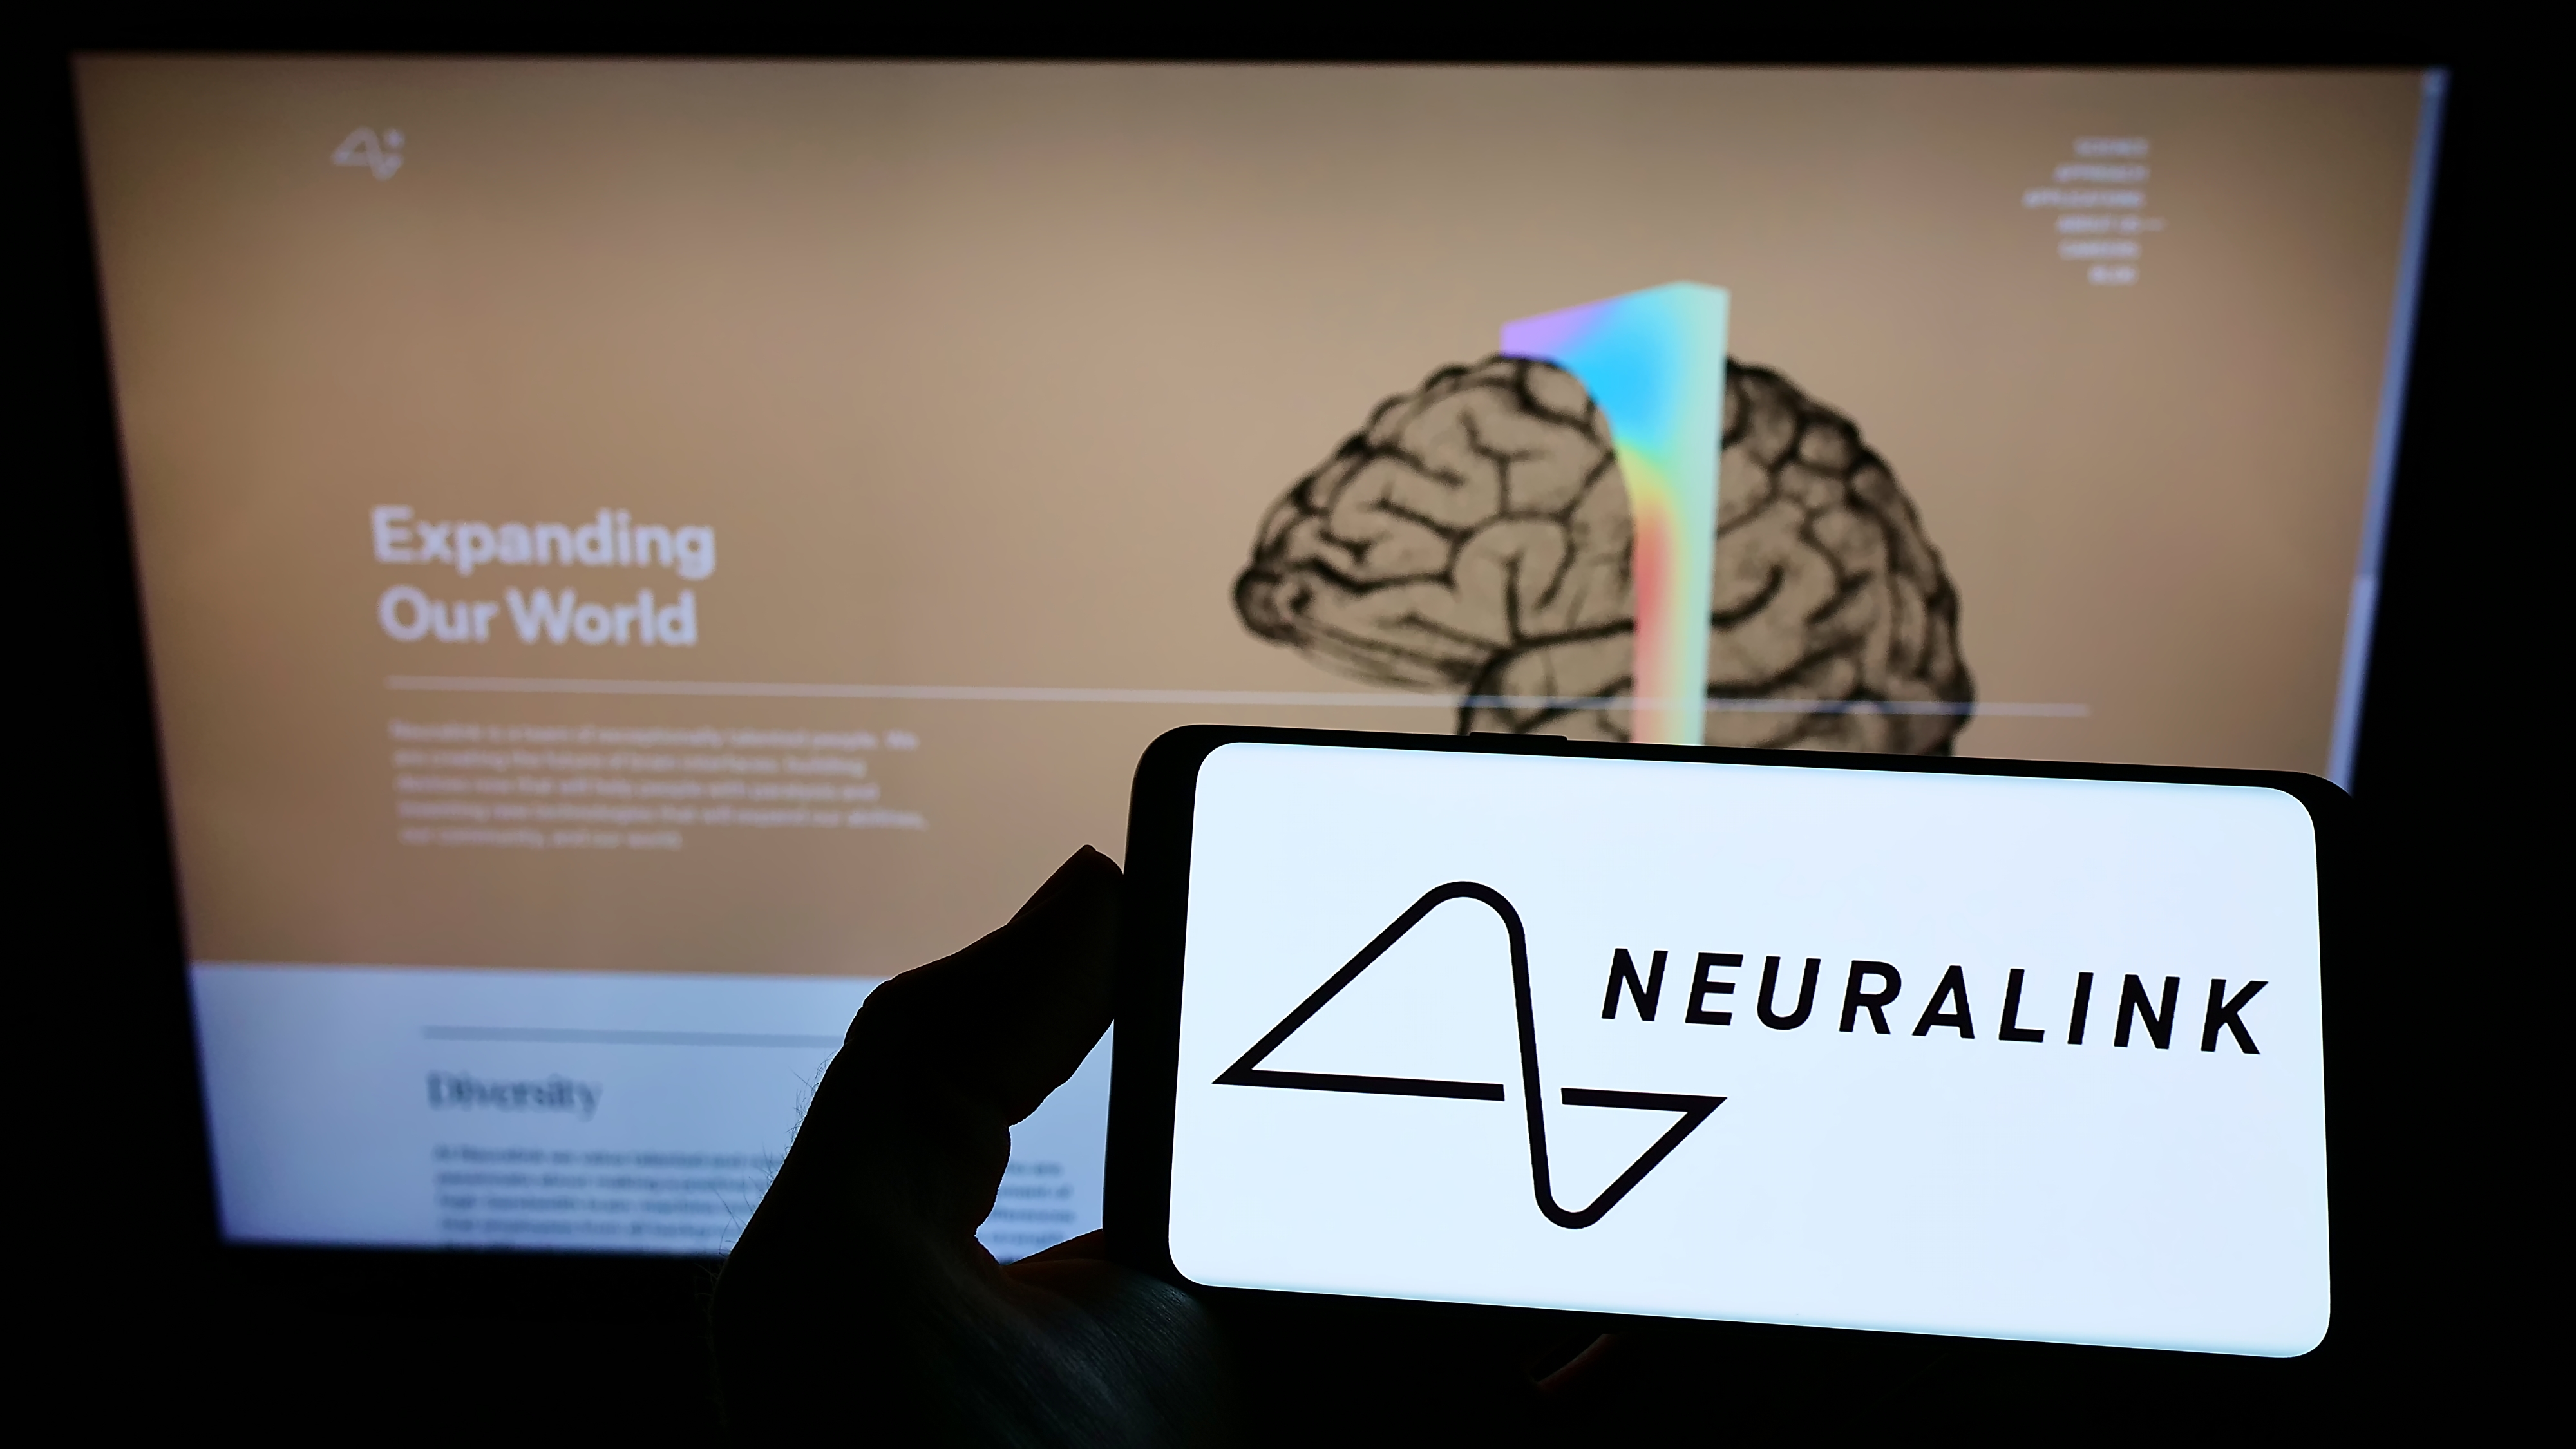 Elon Musk’s Neuralink says FDA approval received for brain-computer clinical study in humans